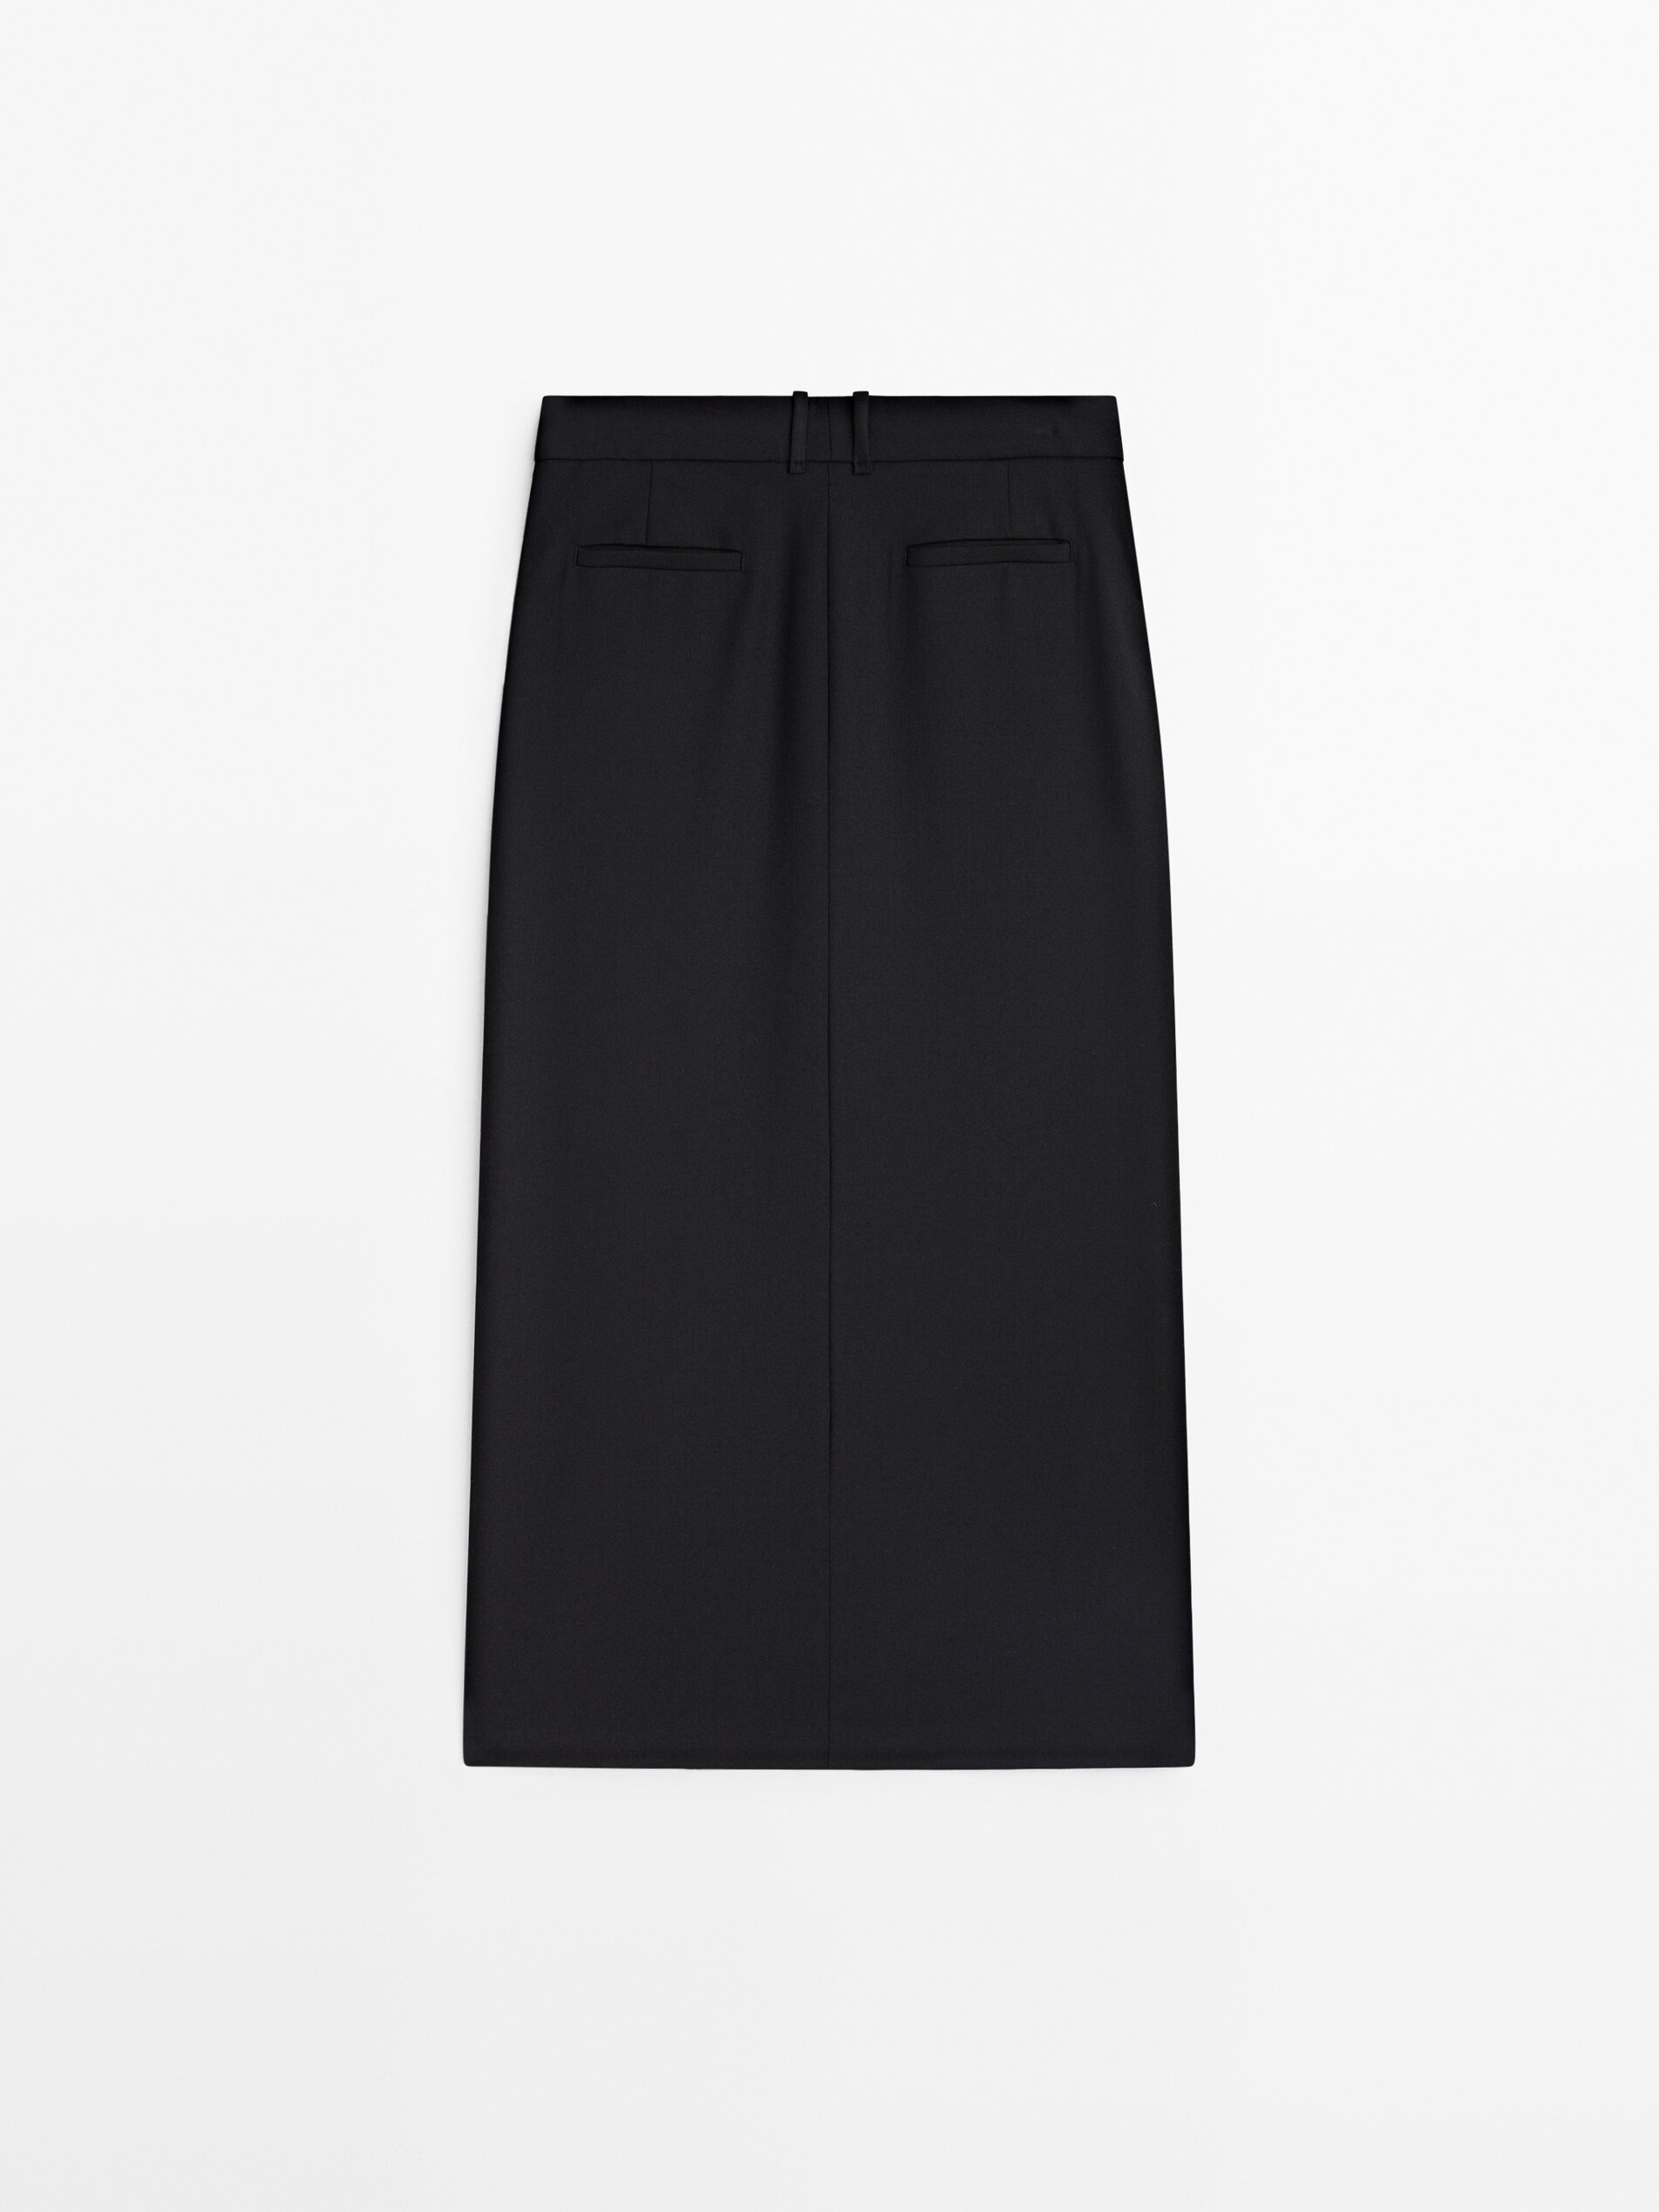 Matteau  Relaxed Tailored Skirt in Black  The UNDONE by Matteau